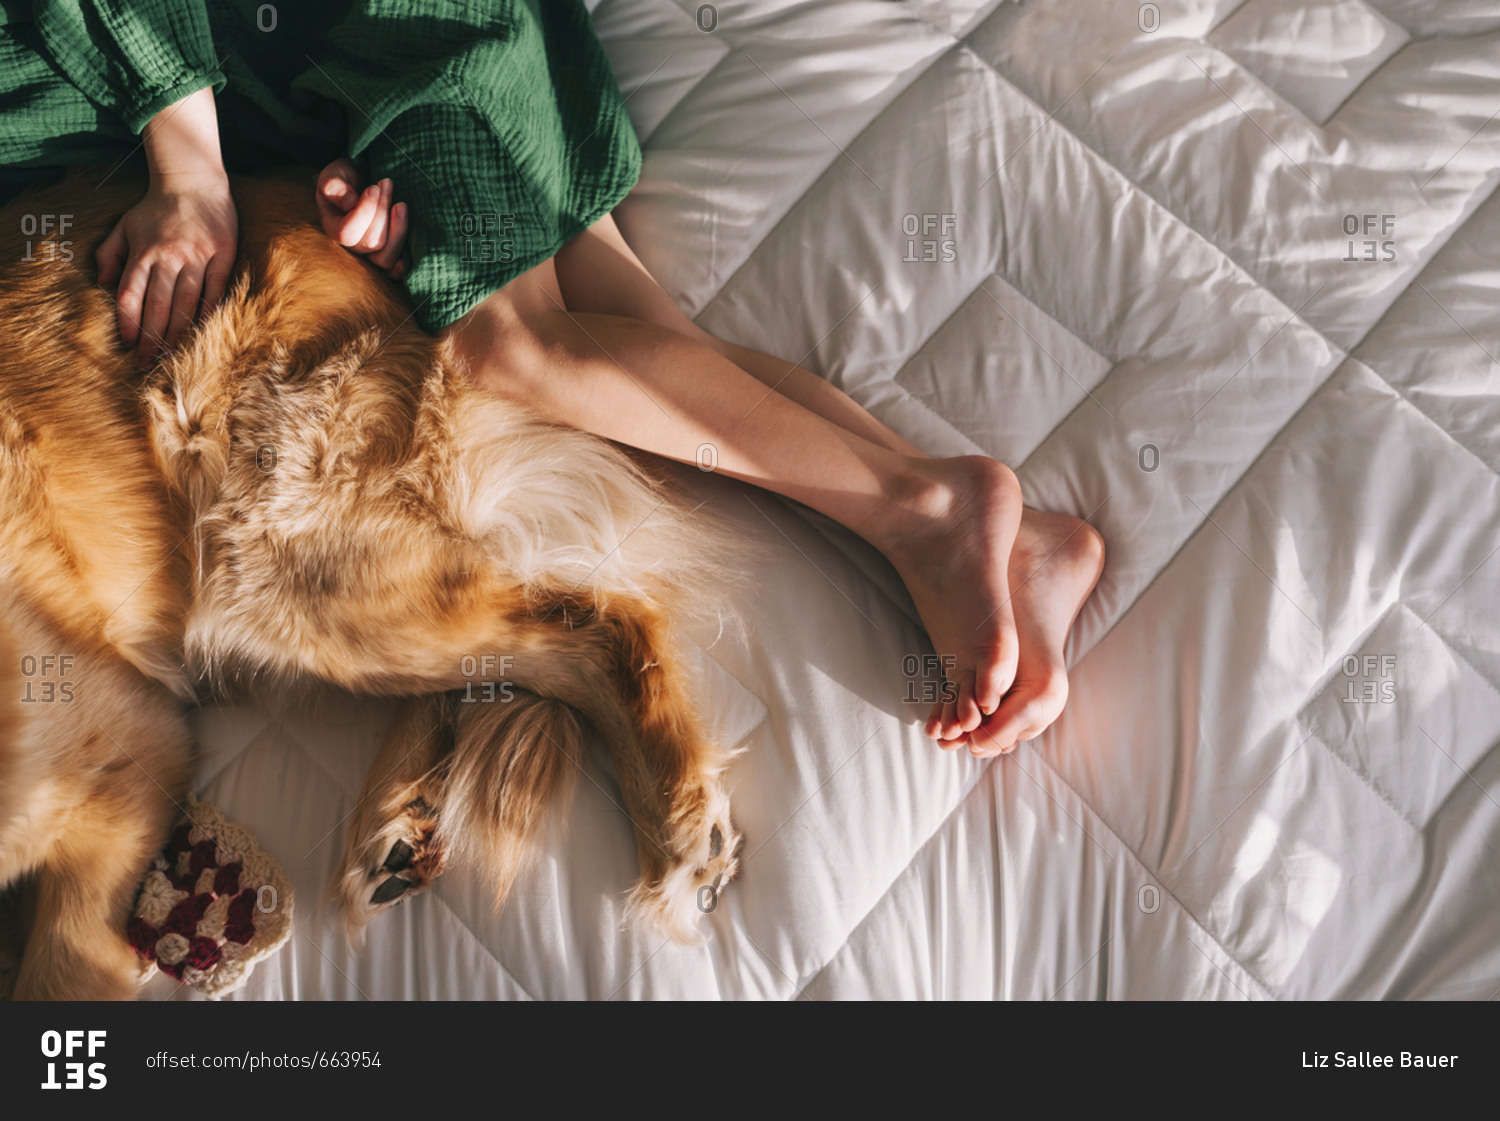 Top down view of legs of young girl and pet Golden Retriever lying together on bed